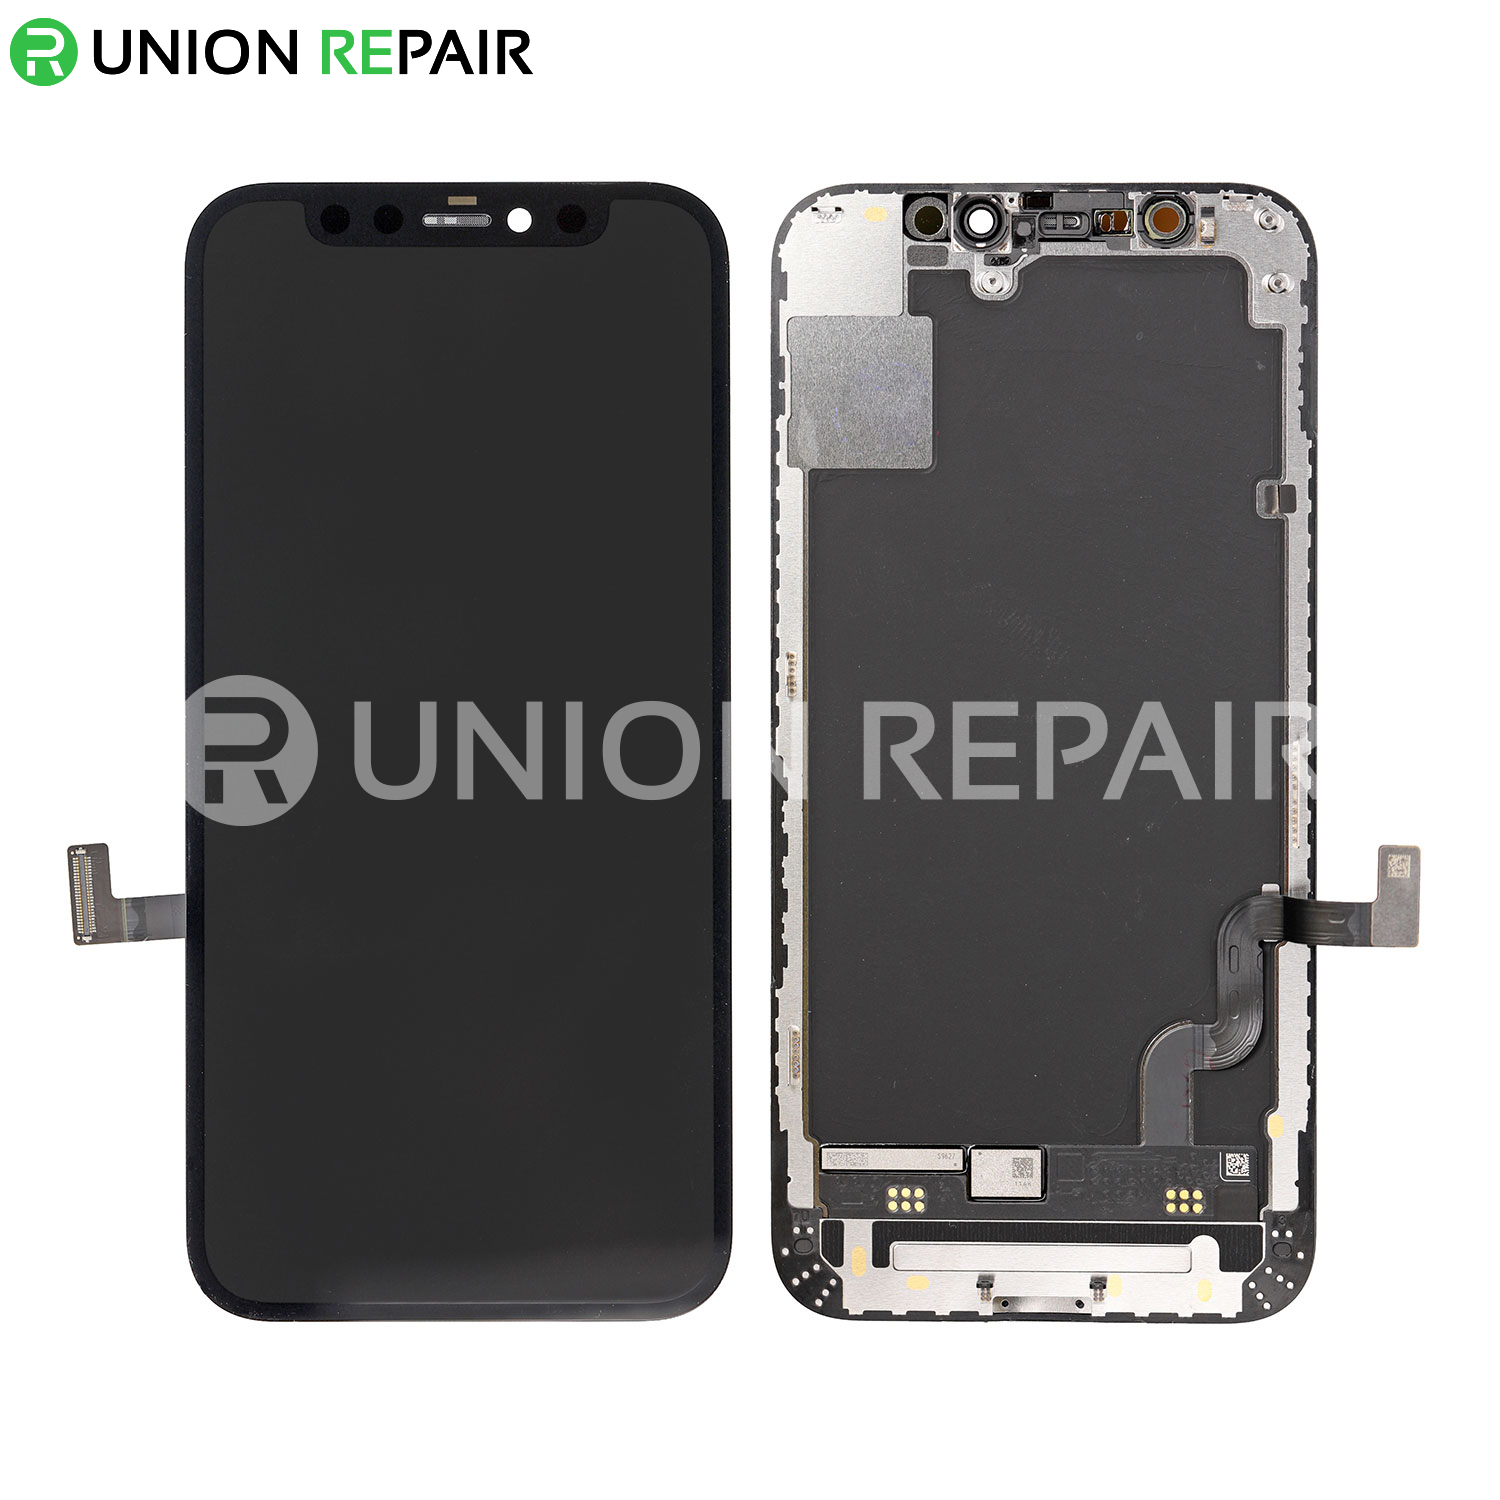 Apple :: iPhone Repair Parts :: iPhone 11 Pro Parts :: iPhone 11 Pro  Premium Black Soft OLED and Digitizer Glass Screen Replacement